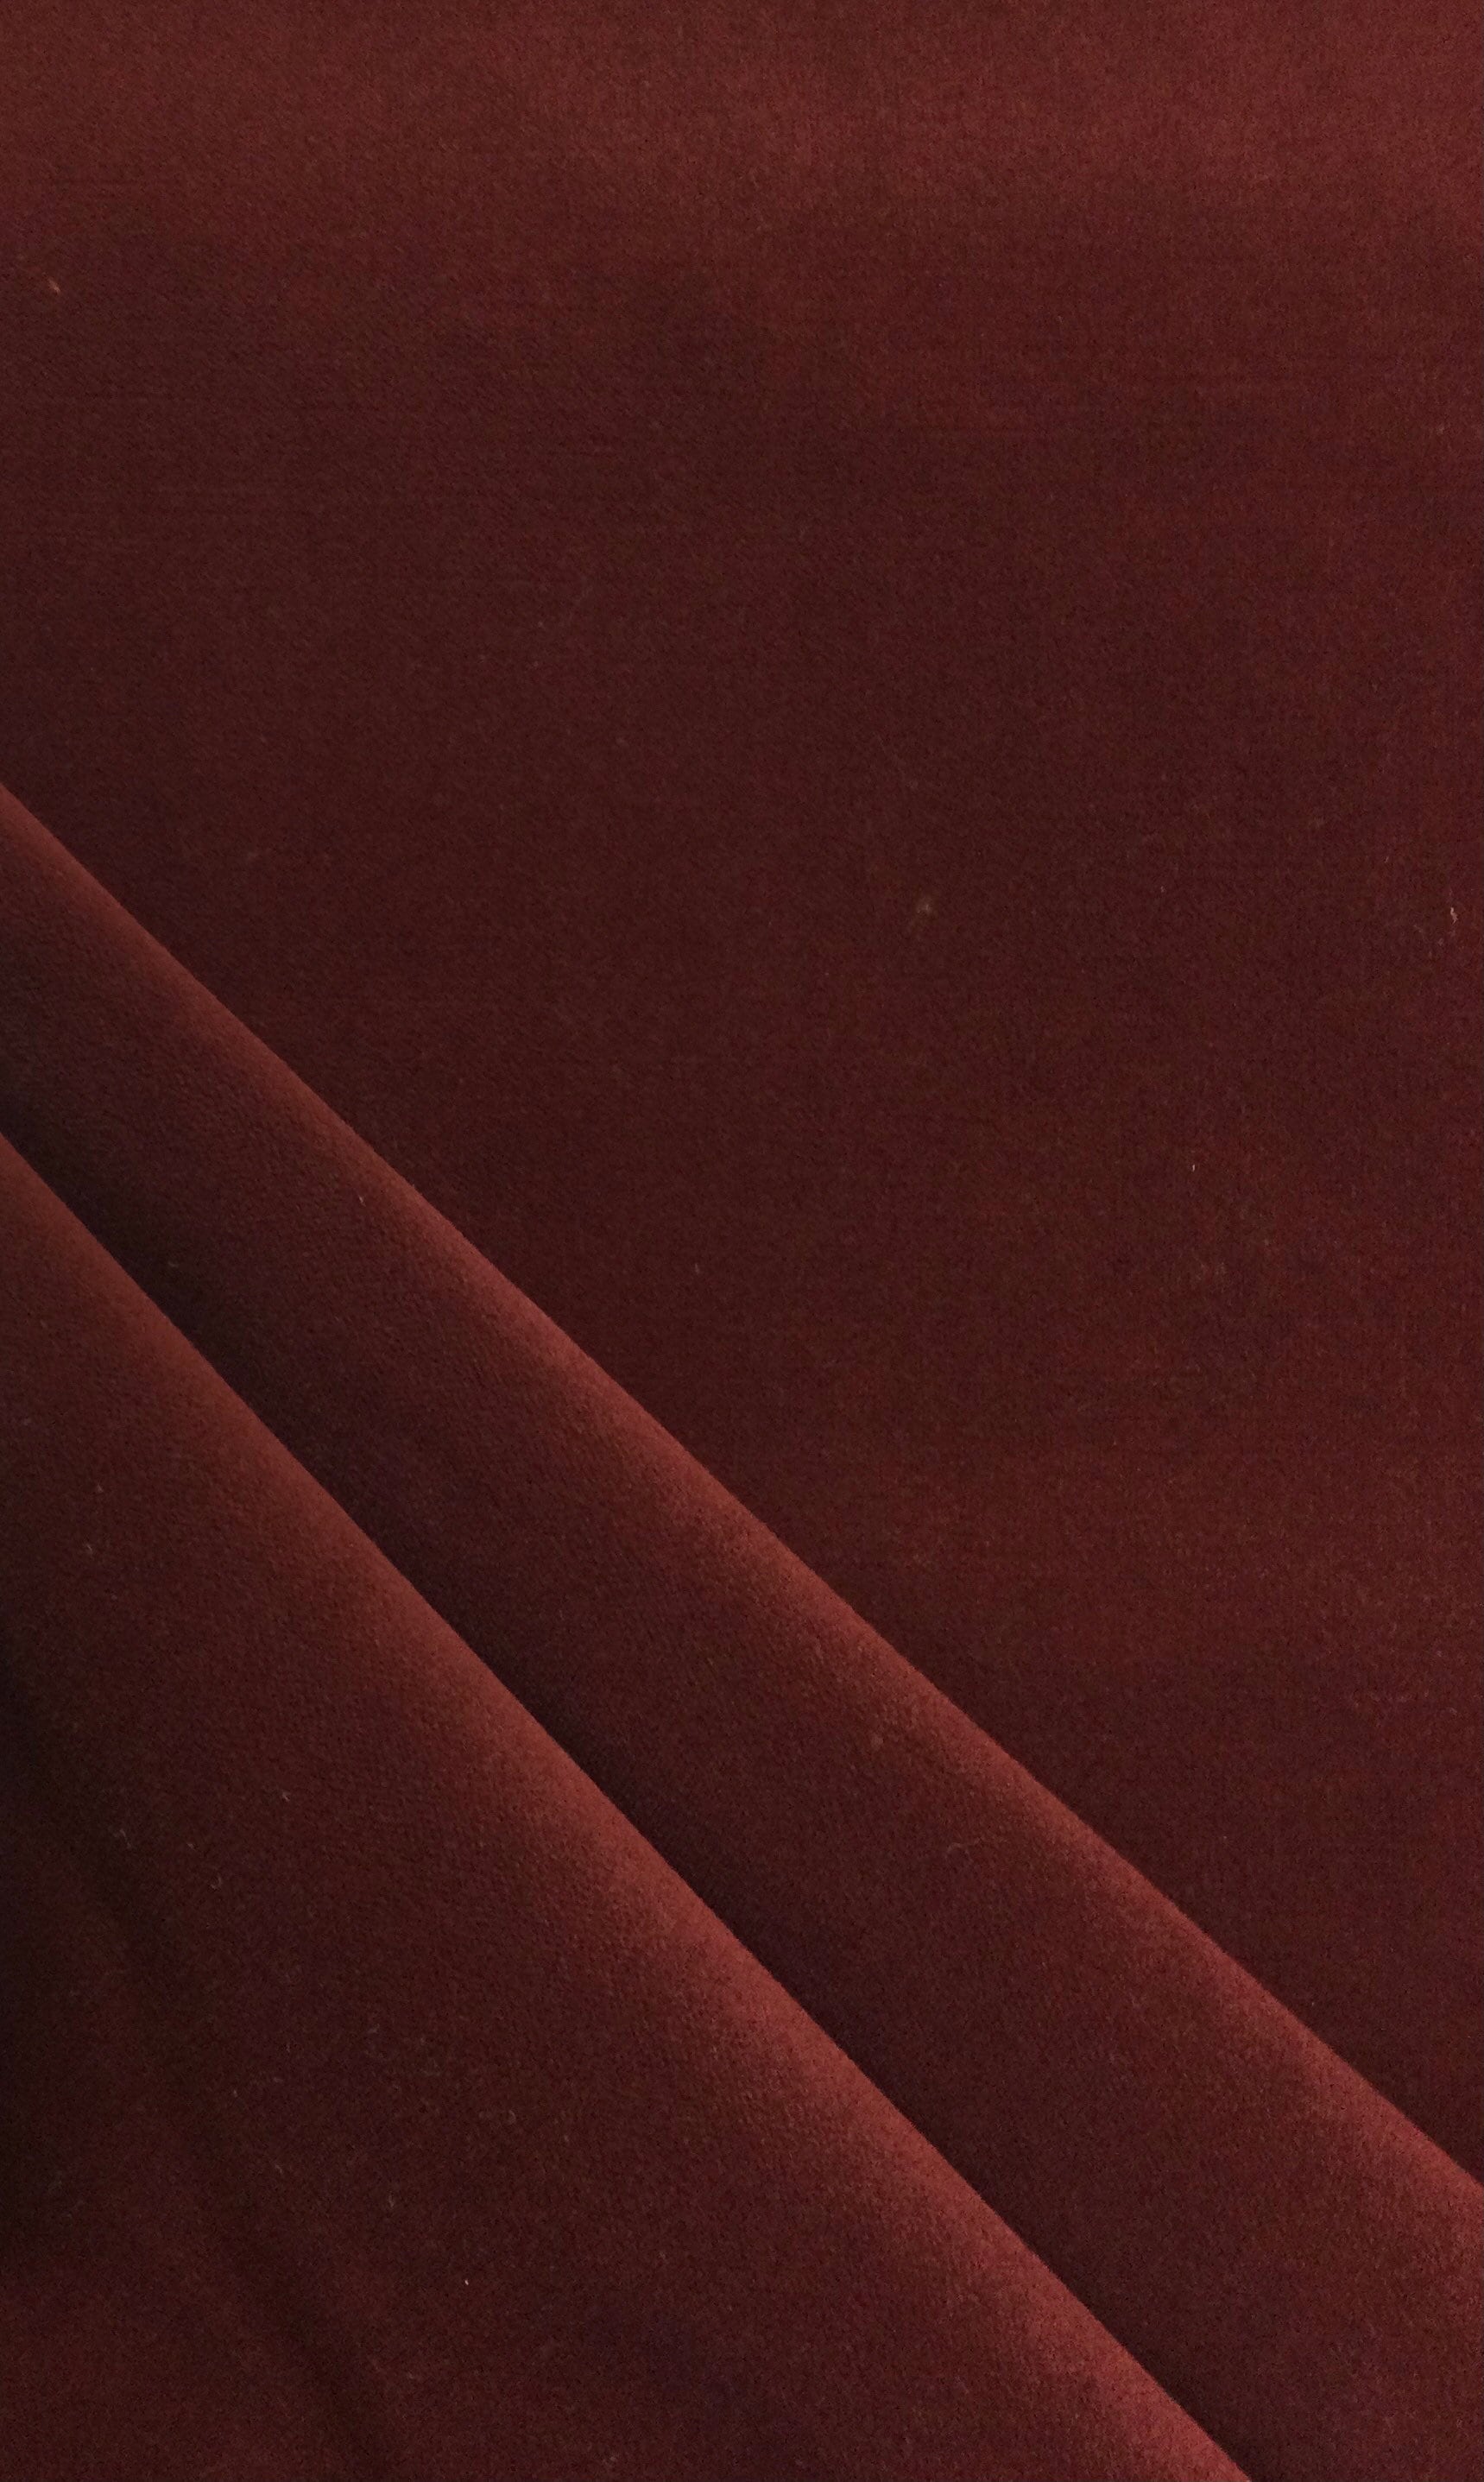 Upholstery Wine Red Velvet Fabric, Fabric by the Yard, Curtain Fabrics,  Pillow Fabric, Furniture Chair Fabrics, Velvet Fabric by the Yard 